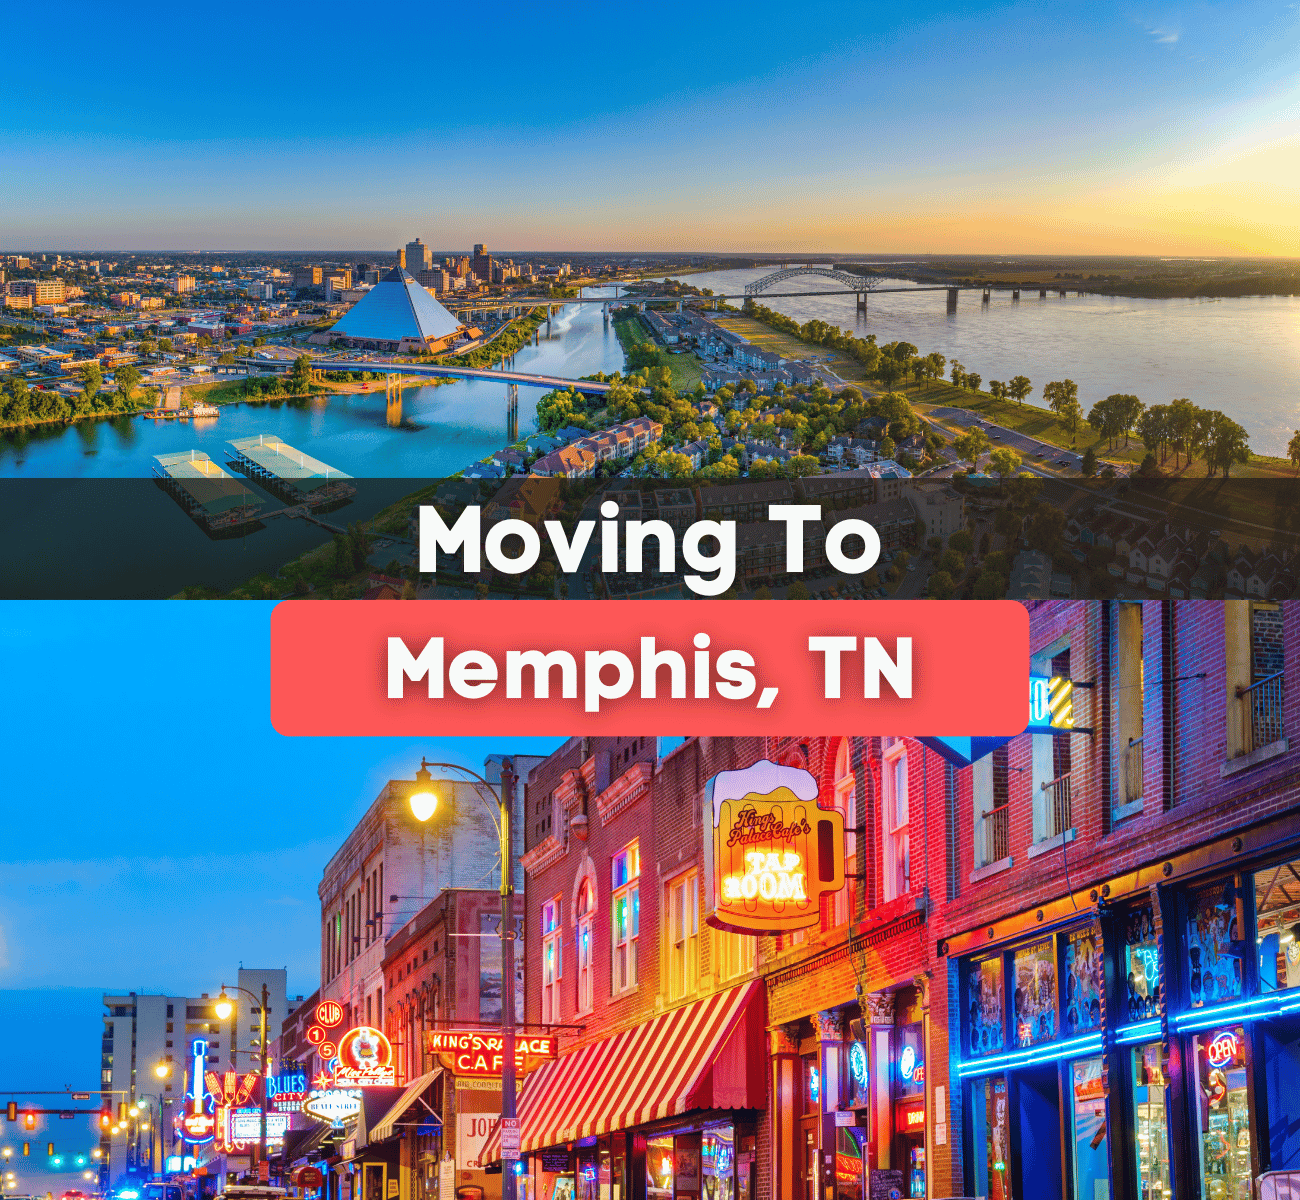 Moving to Memphis, TN - Memphis skyline and the Beale Street Music District